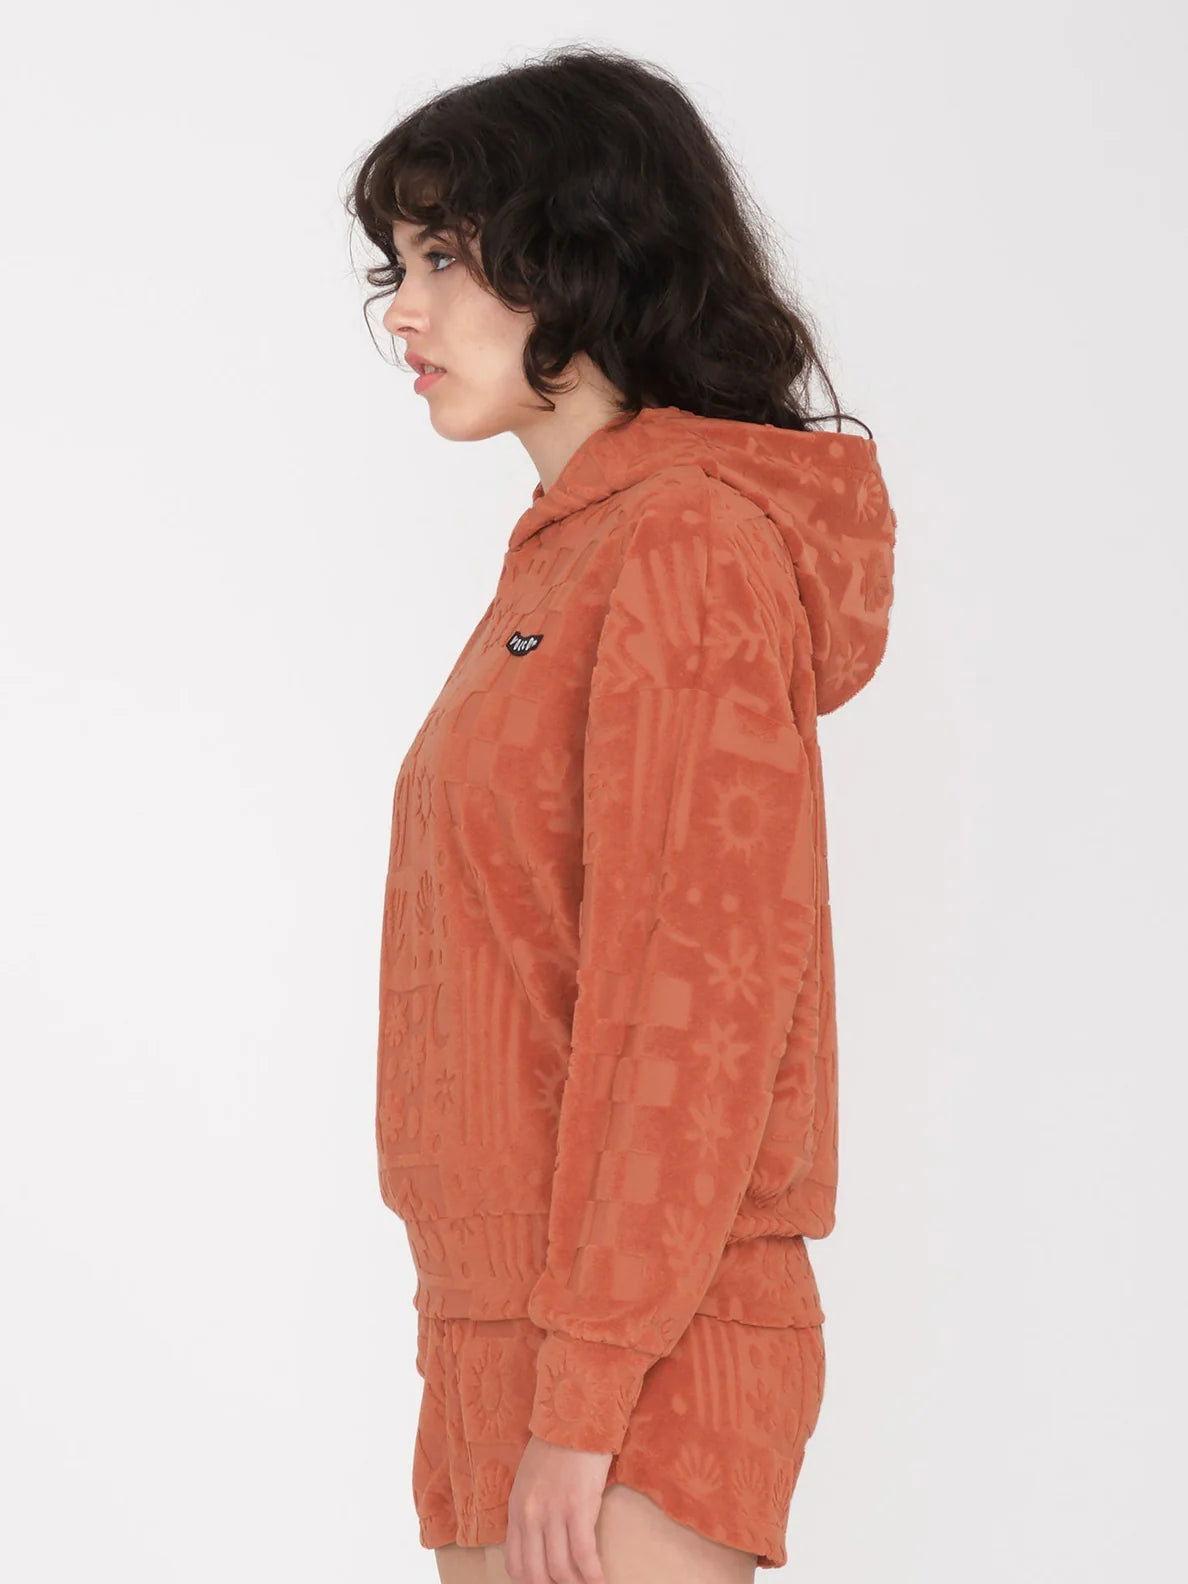 Volcom - Sunny Wild Terry Hoodie | Rosewood -  - Married to the Sea Surf Shop - 